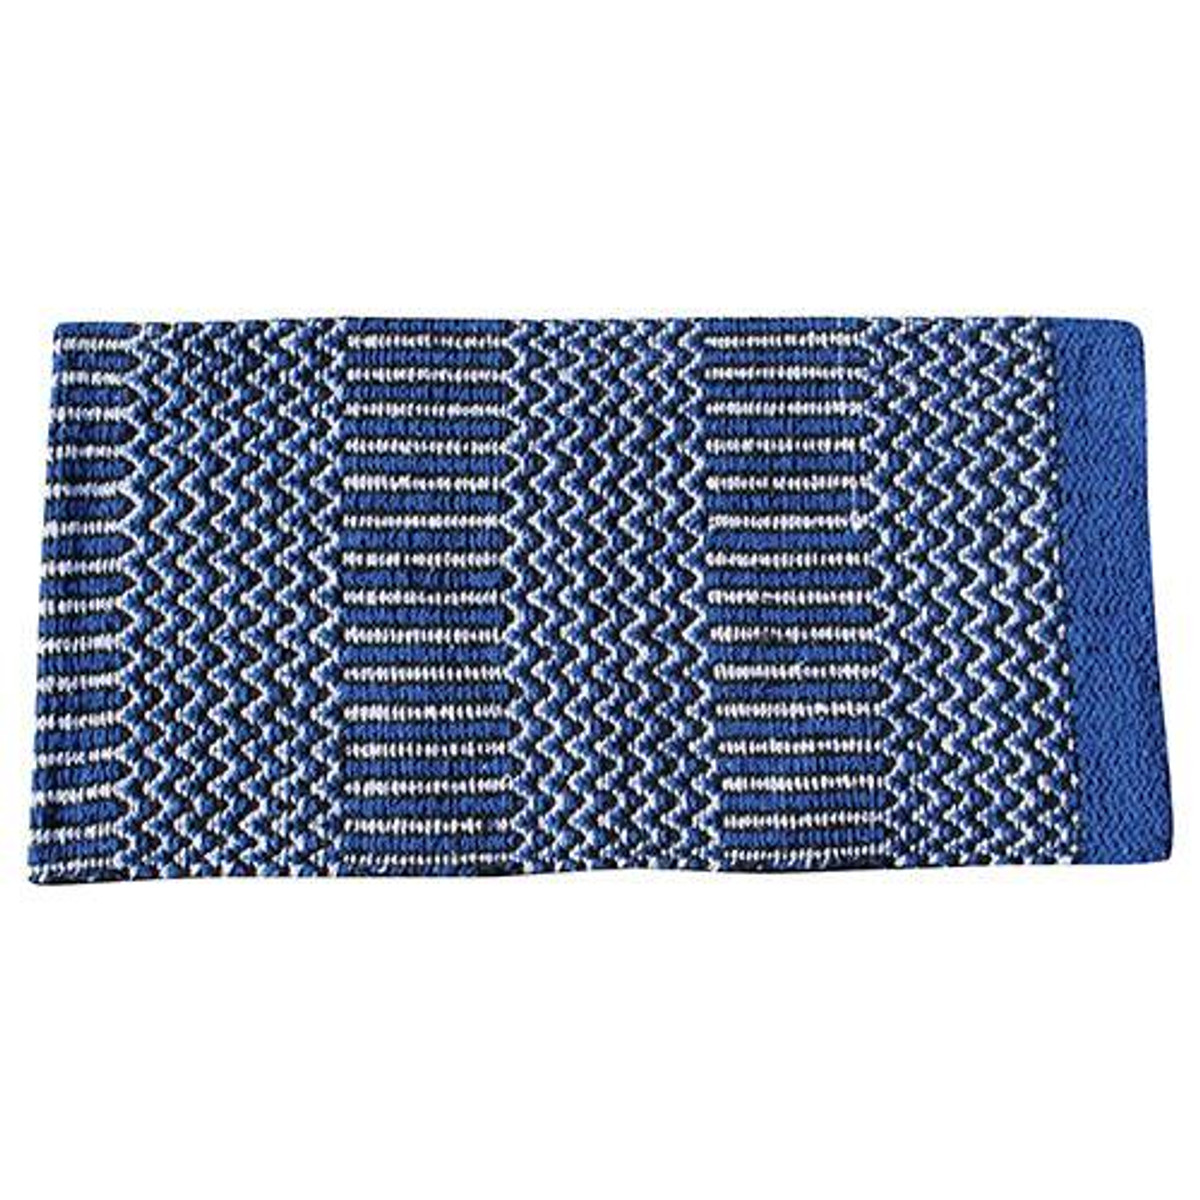 Professional's Choice® - Double Weave Saddle Blanket